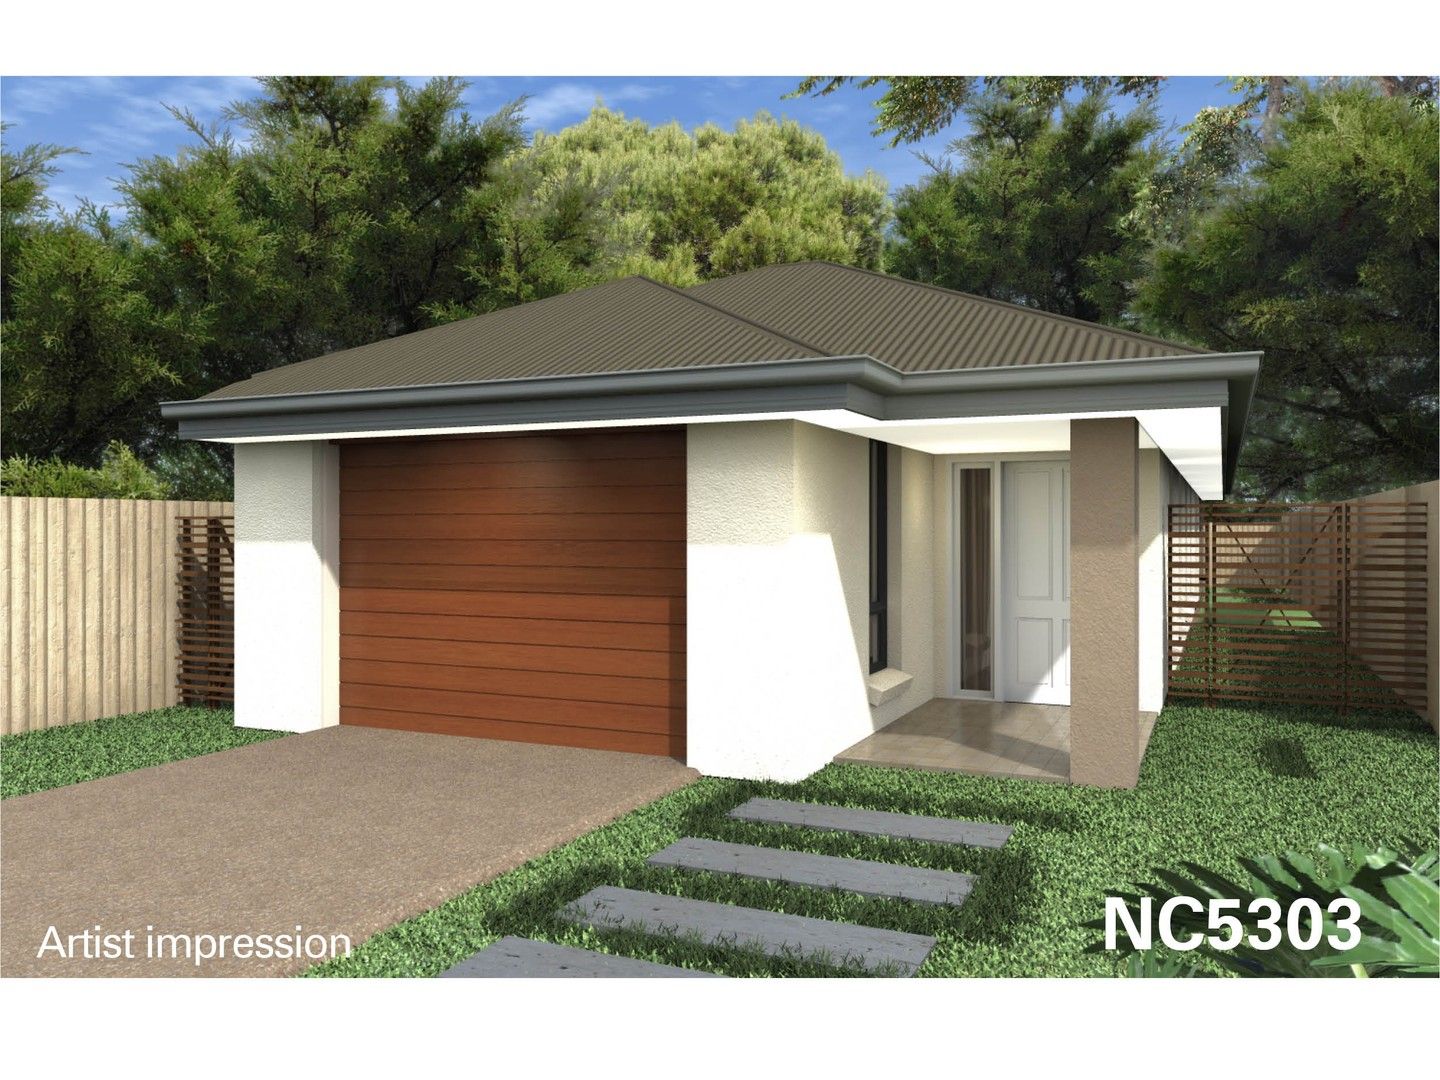 3 bedrooms New House & Land in Lot 4/41 Mcilwraith St EVERTON PARK QLD, 4053